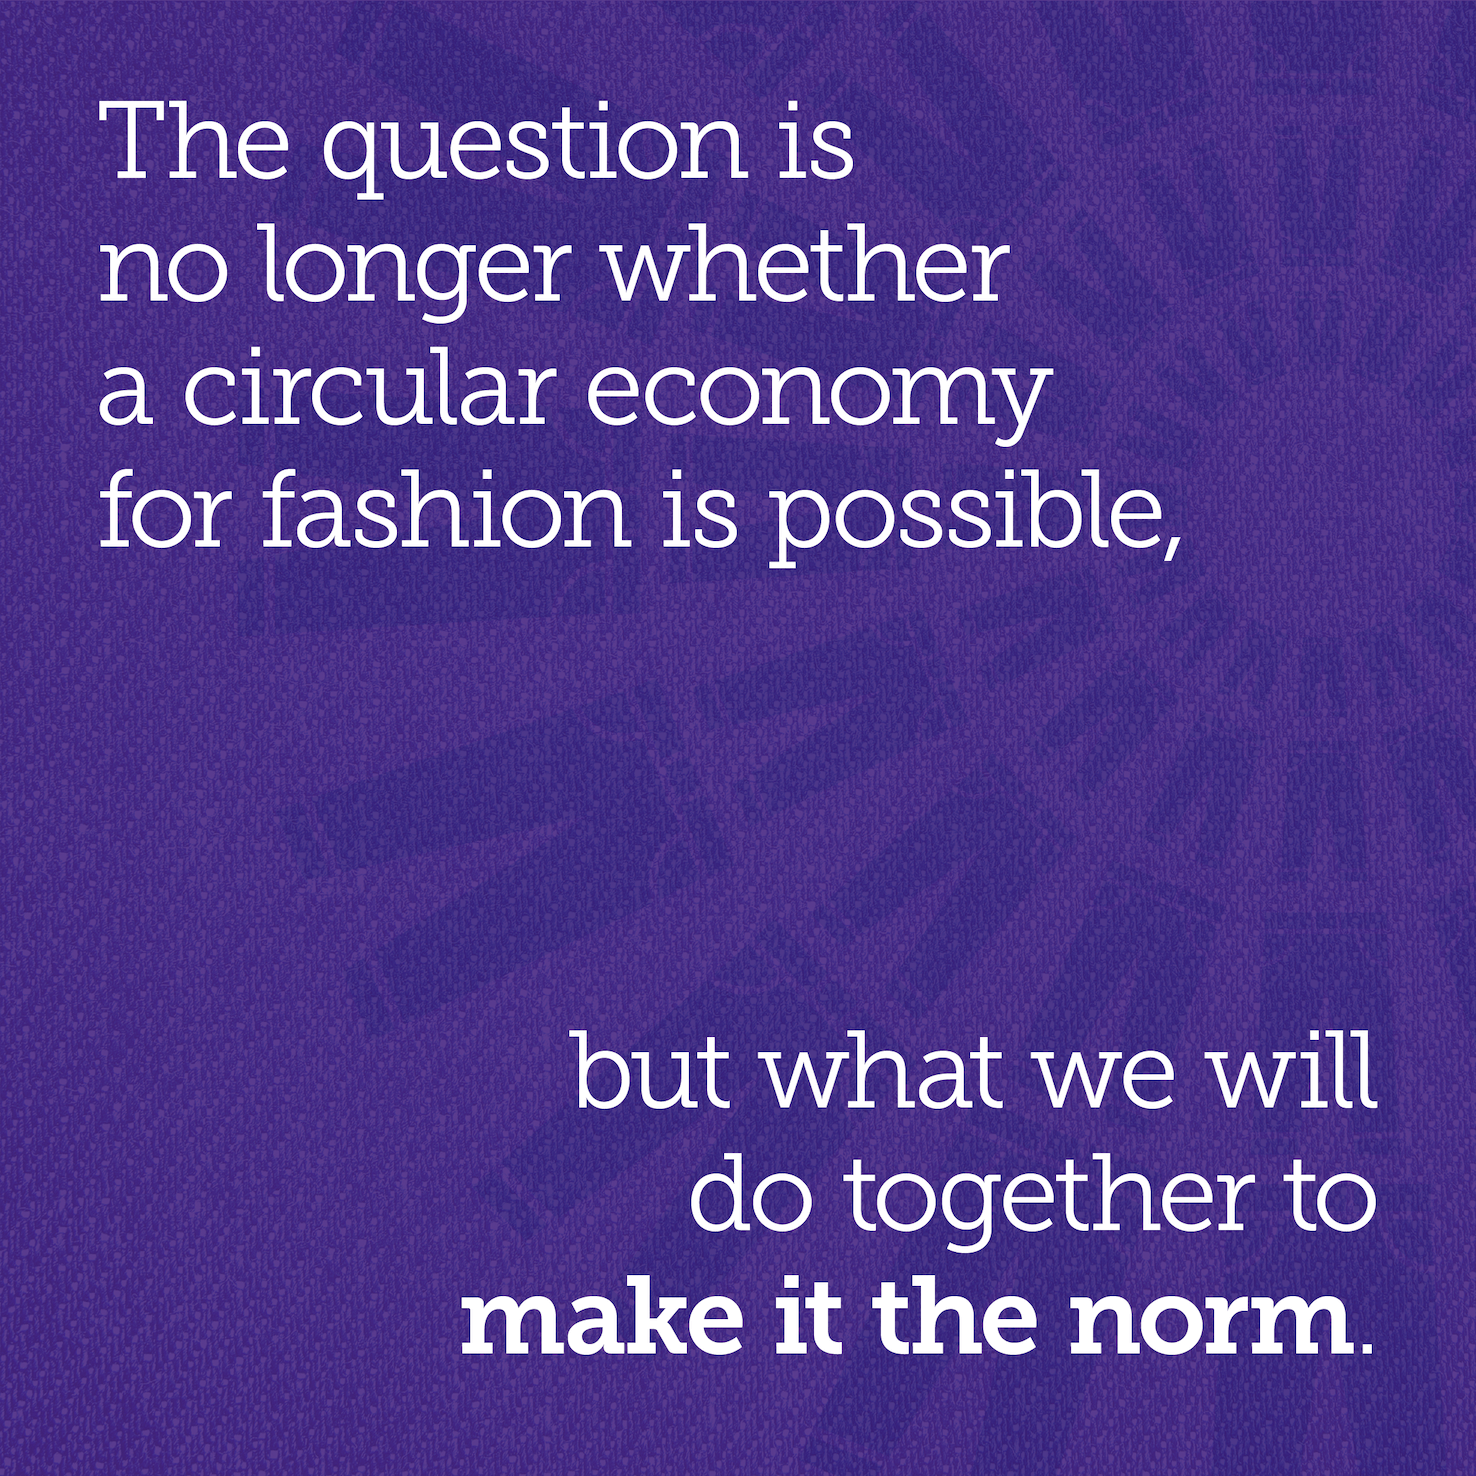 The question is no longer whether a circular economy for fashion is possible, but what we will do together to make it the norm.